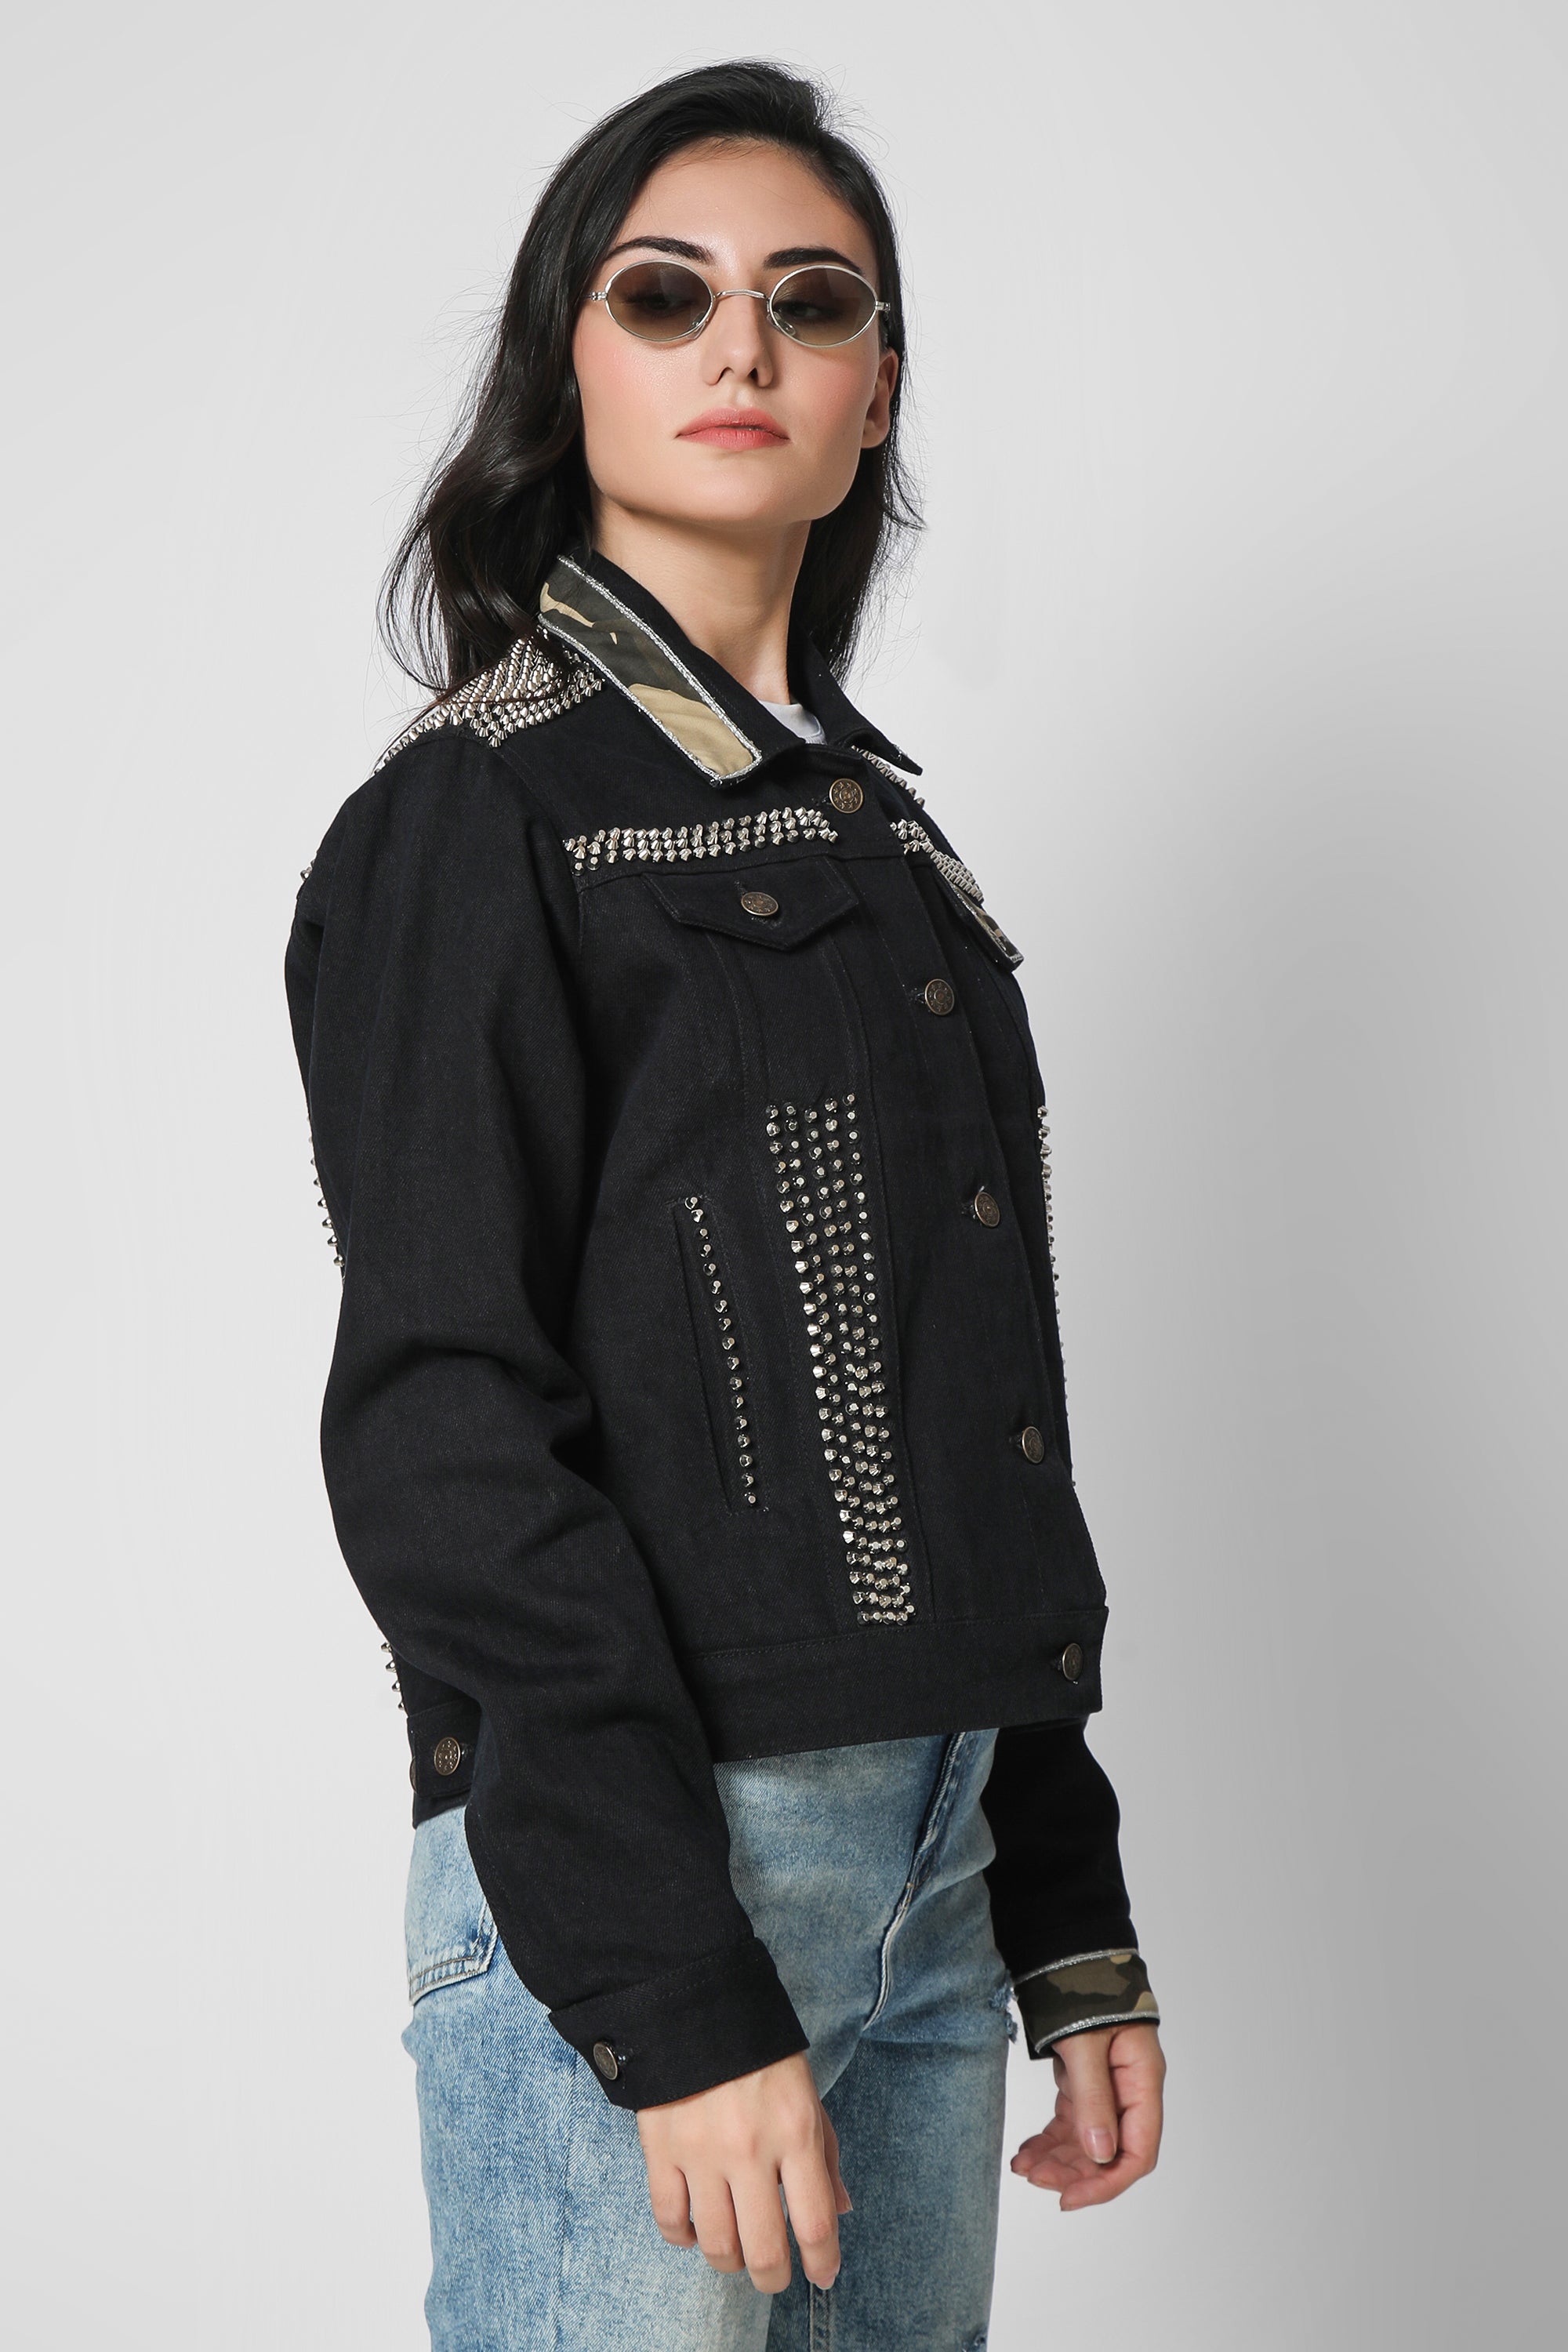 Studded Jackets  Buy Studded Jackets online in India